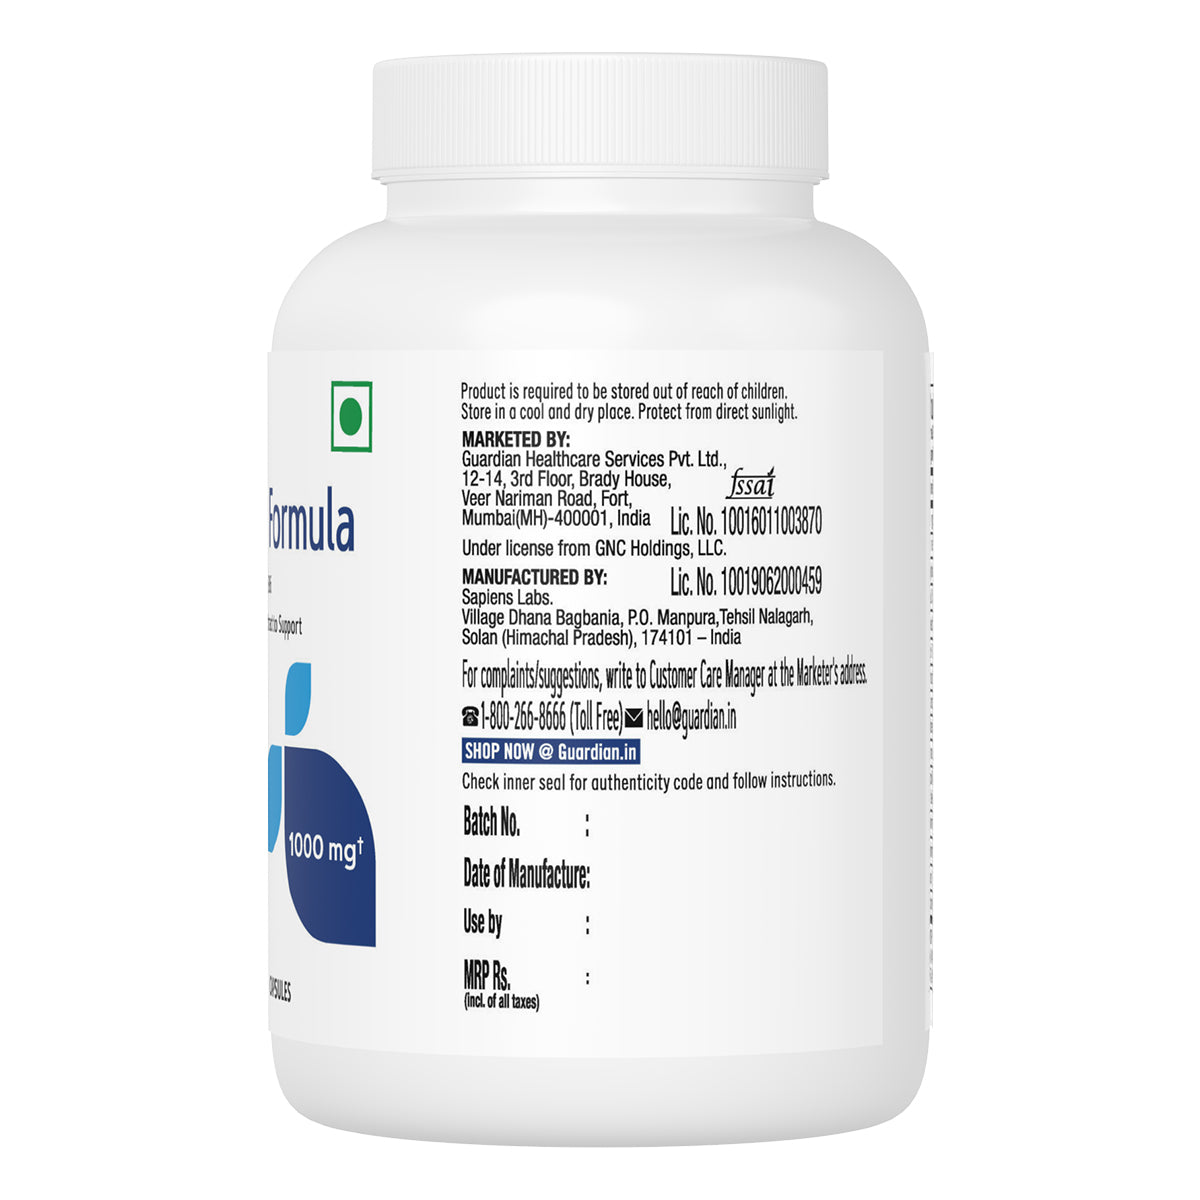 GNC Immune Formula - Protects Against Infections & Reduces Common Cold Risks